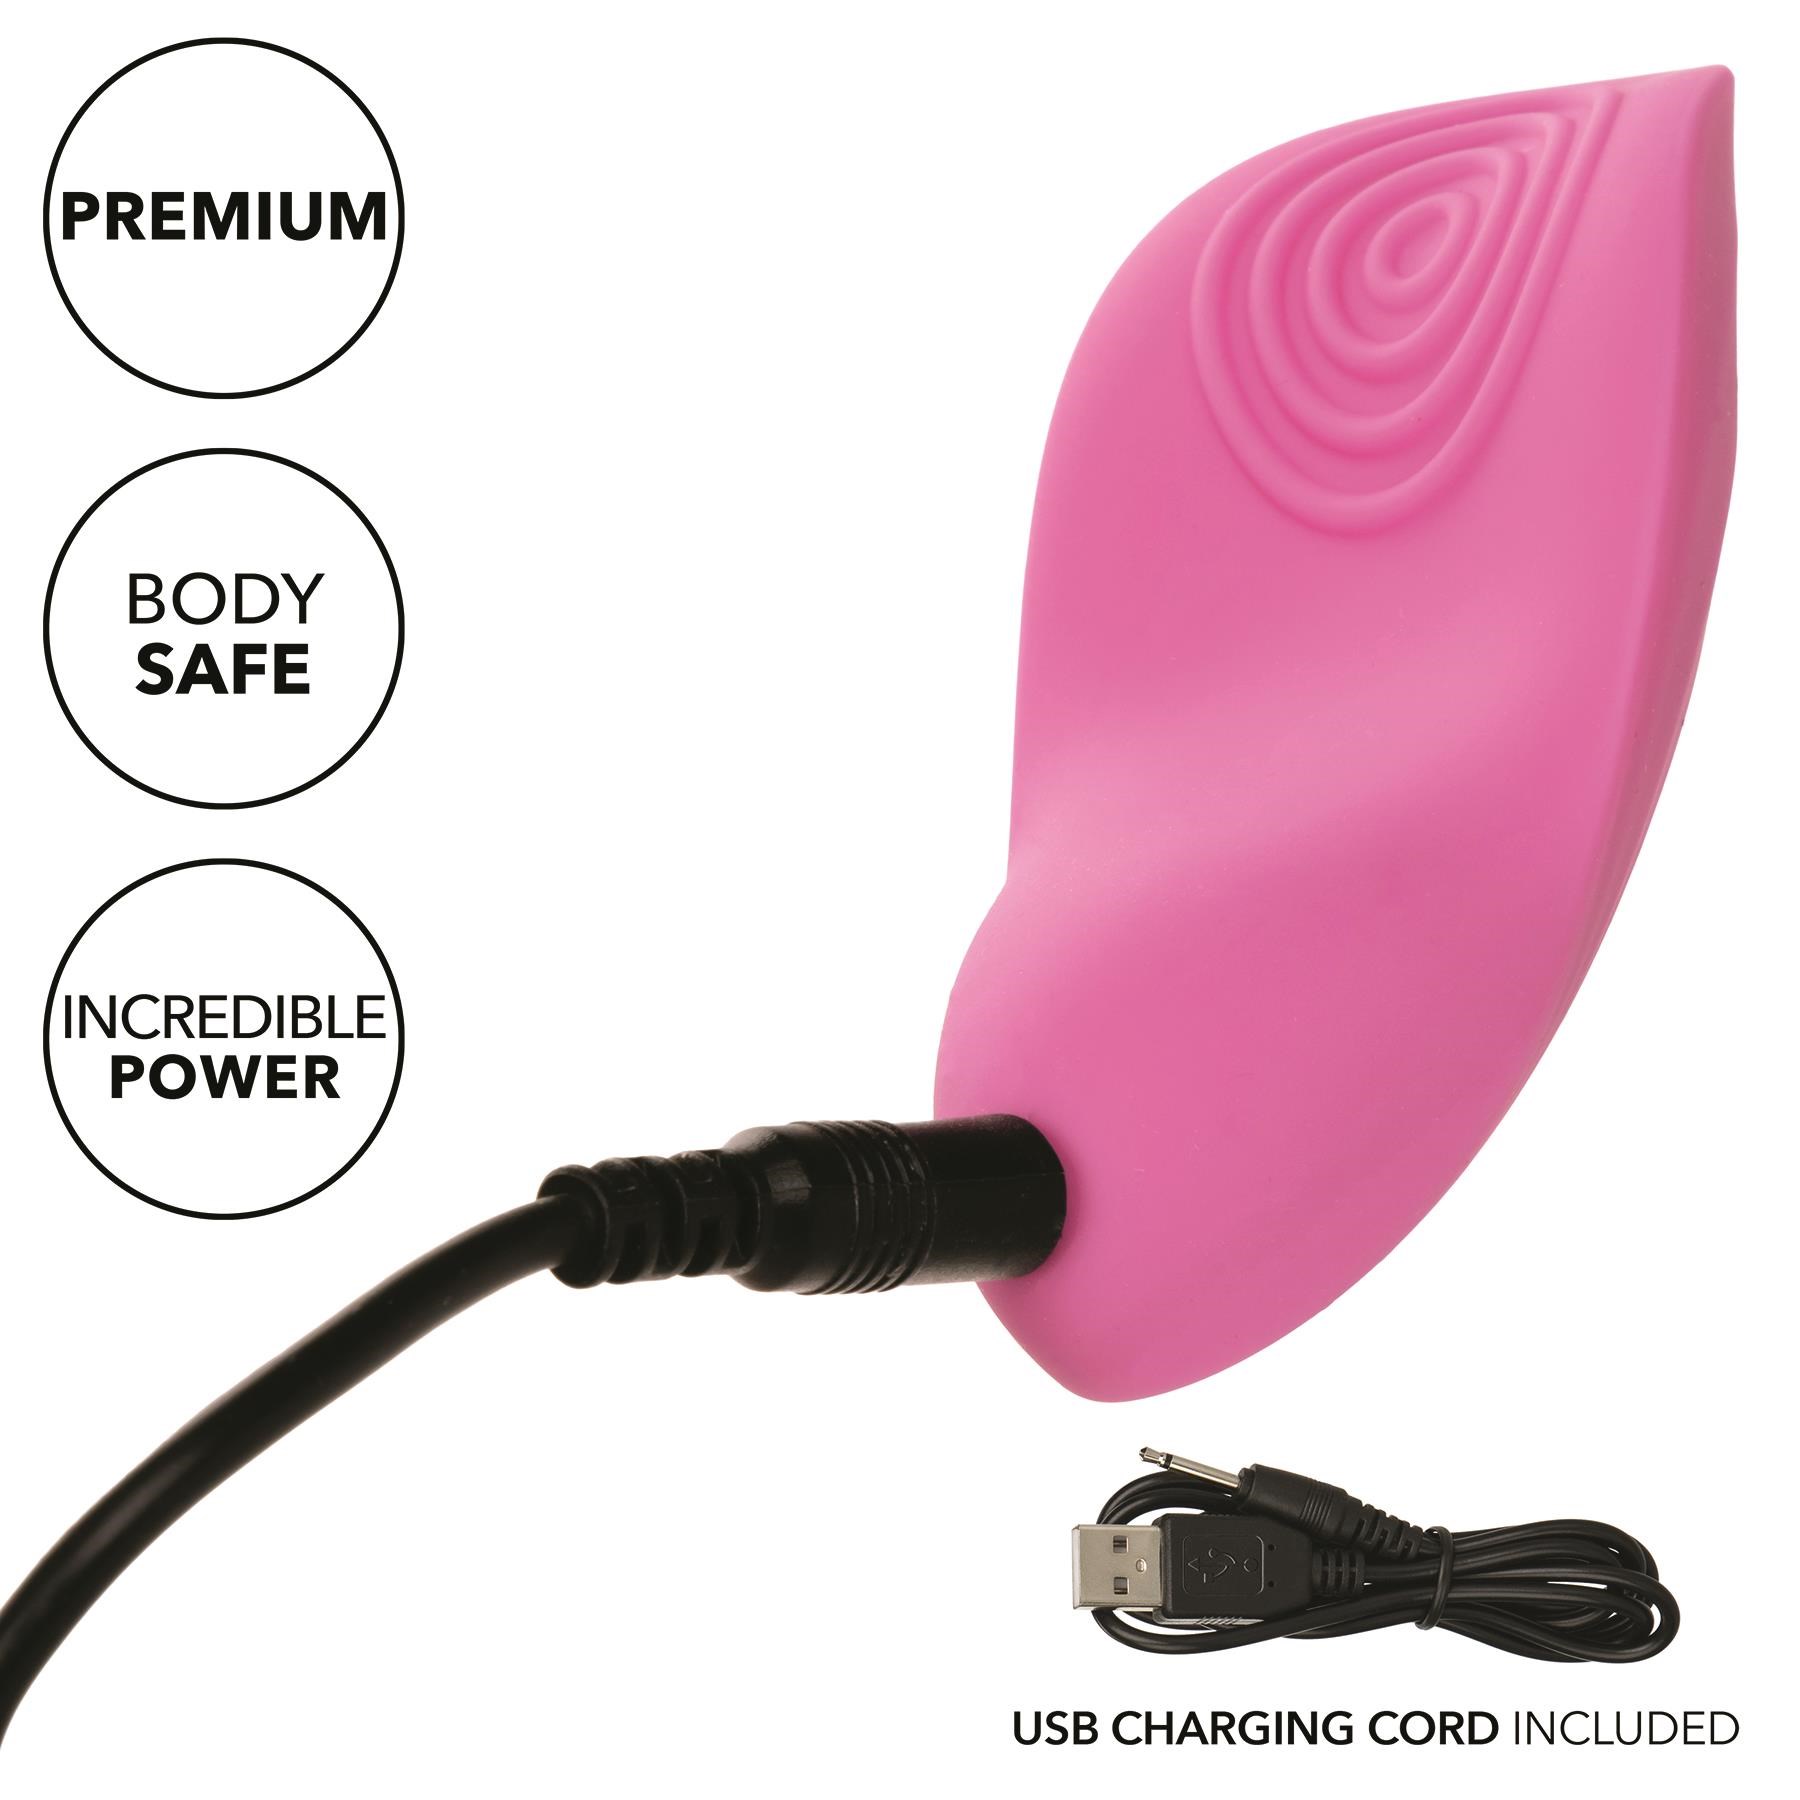 Luvmor Teases Rechargeable Massager - Showing Where Charging Cable is Placed